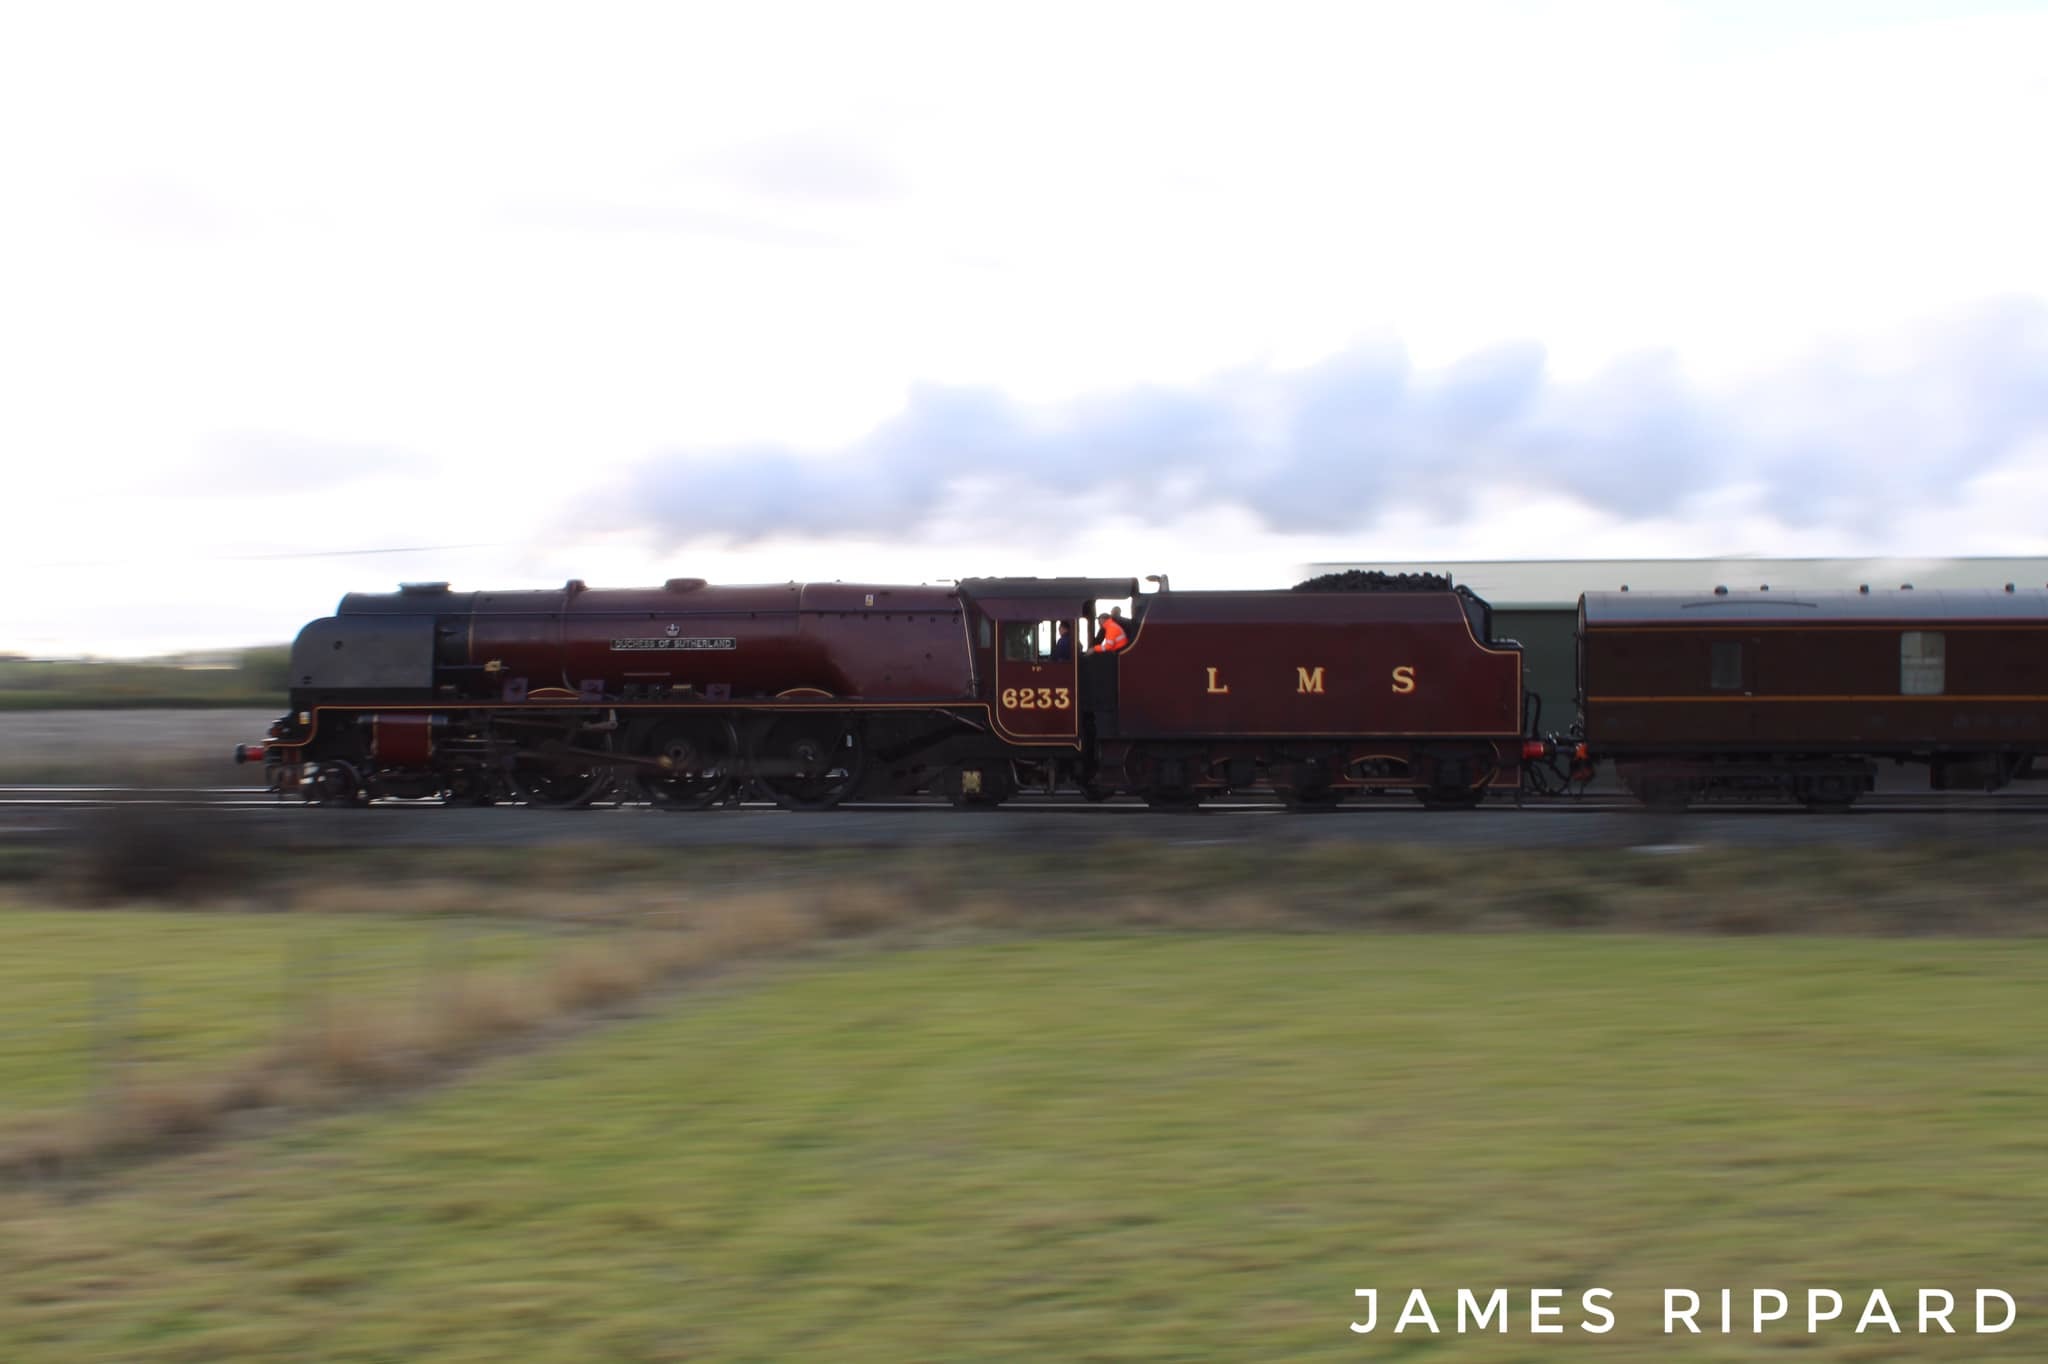 The Duchess of Sutherland travelling through Herefordshire. Picture: James Rippard